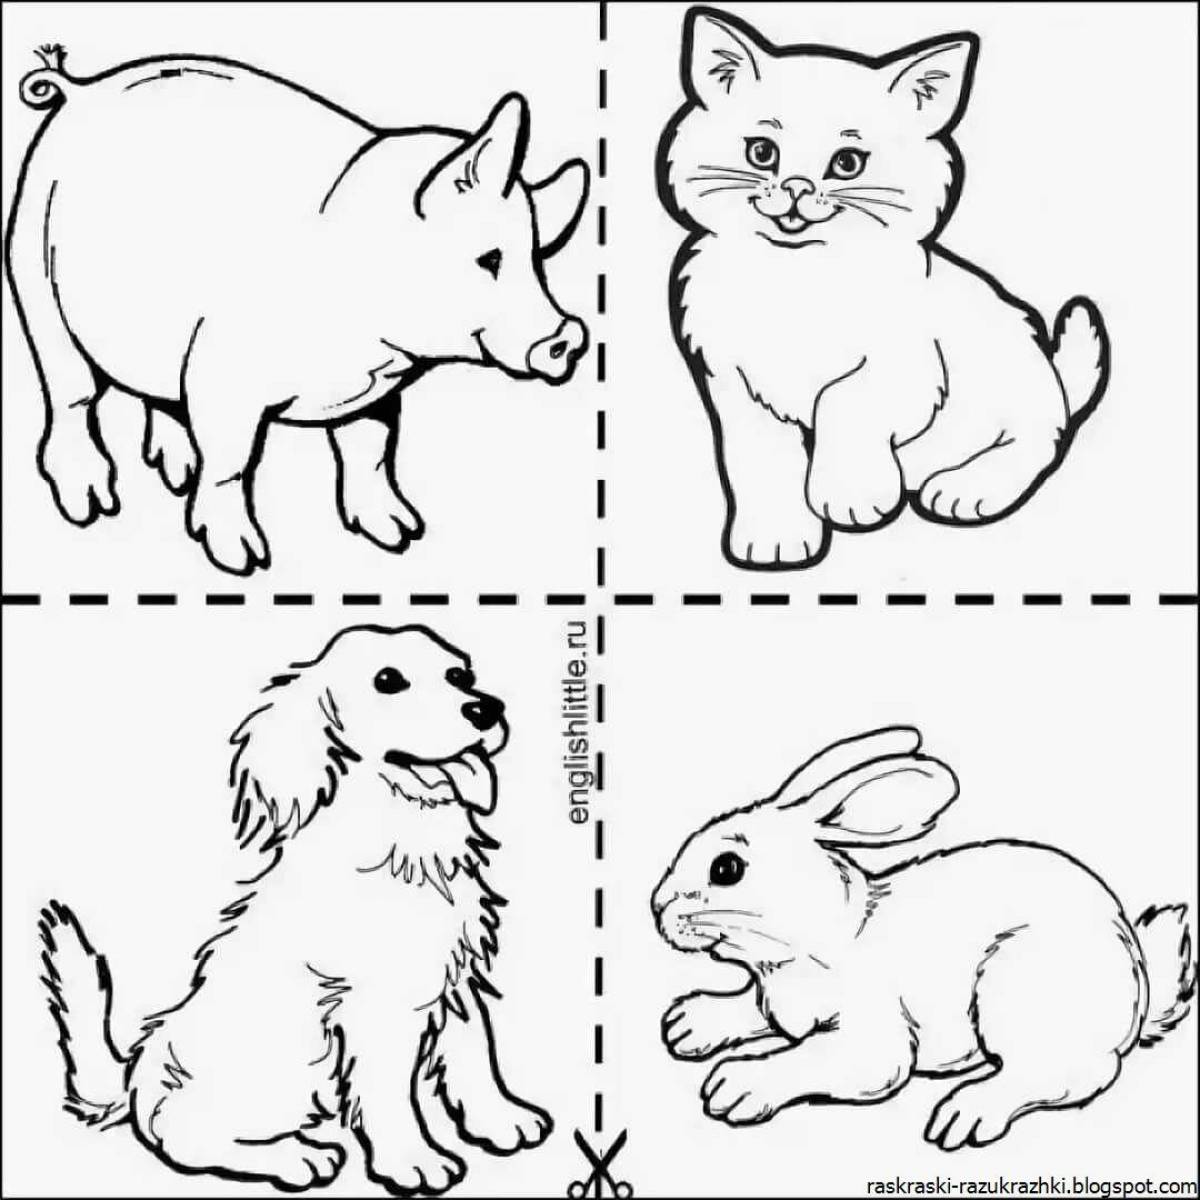 Courtesy pet coloring pages for 6-7 year olds